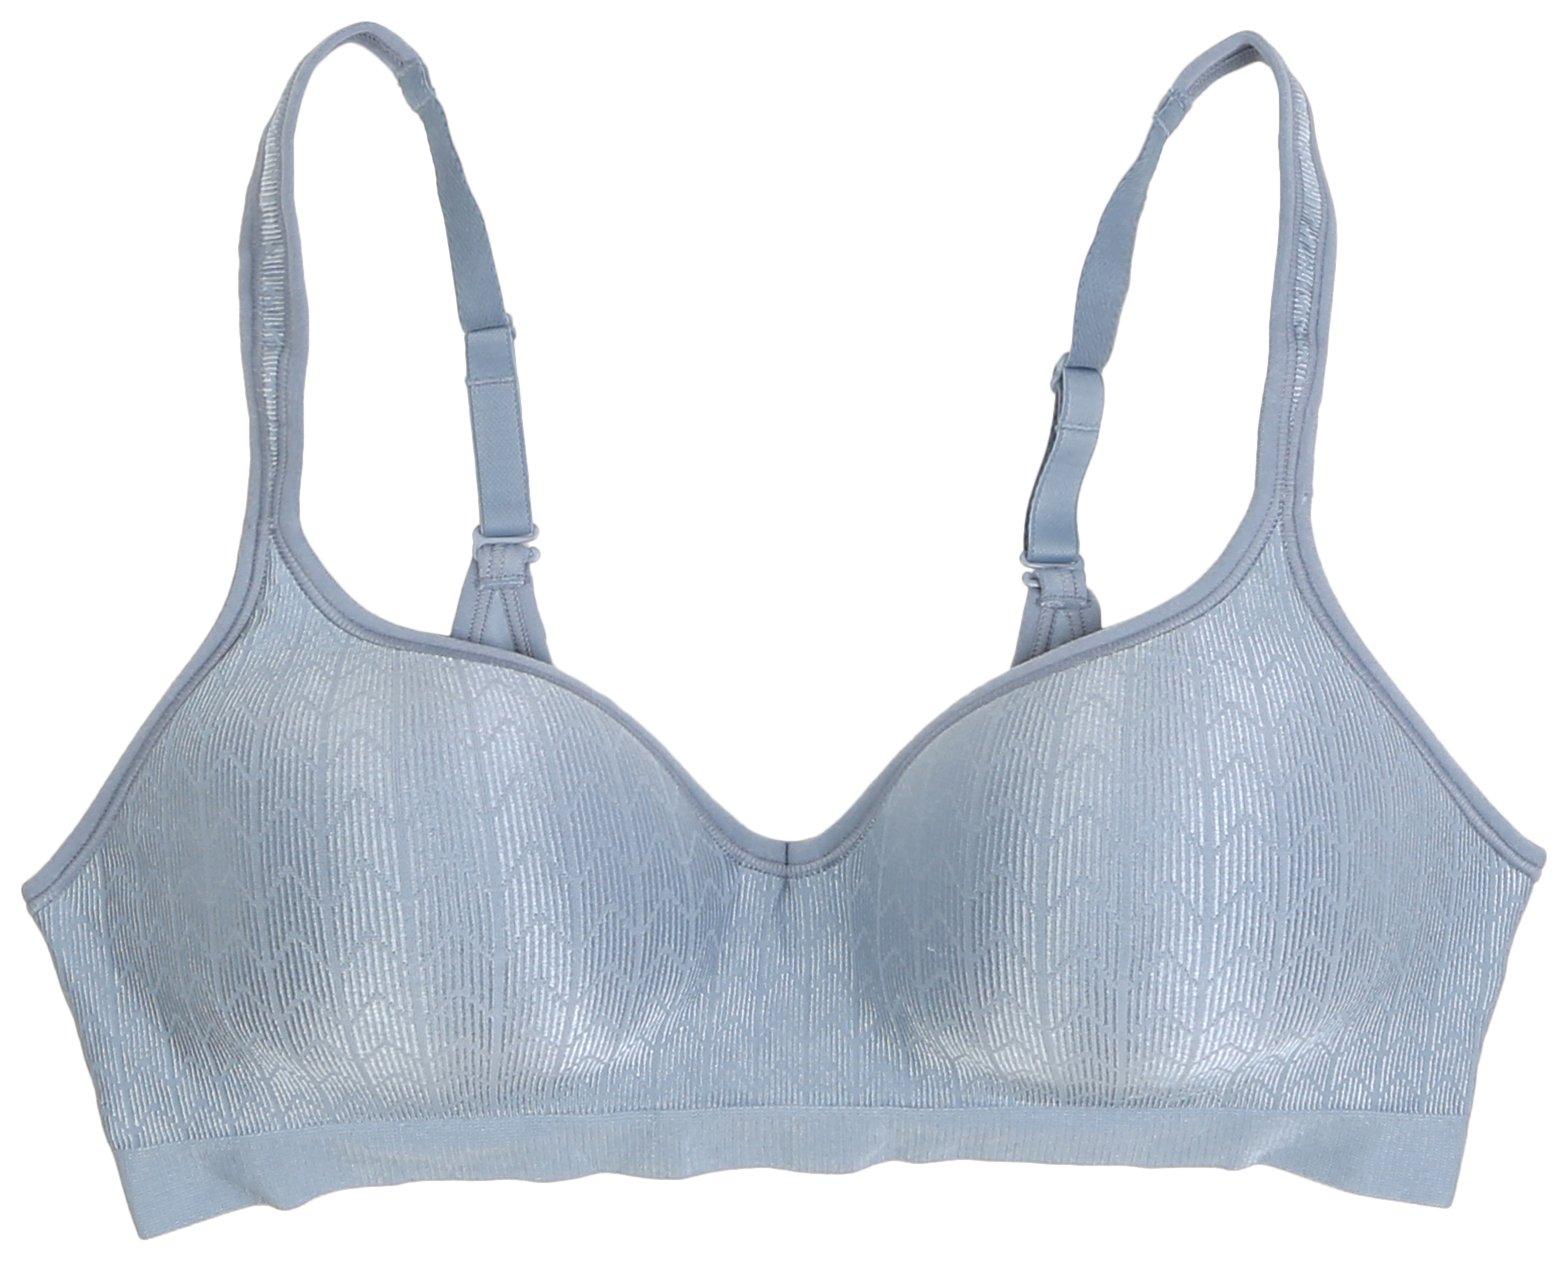 ENELL Cotton Candy High Impact Wire-Free Racerback Sports Bra, US 7, NWOT 